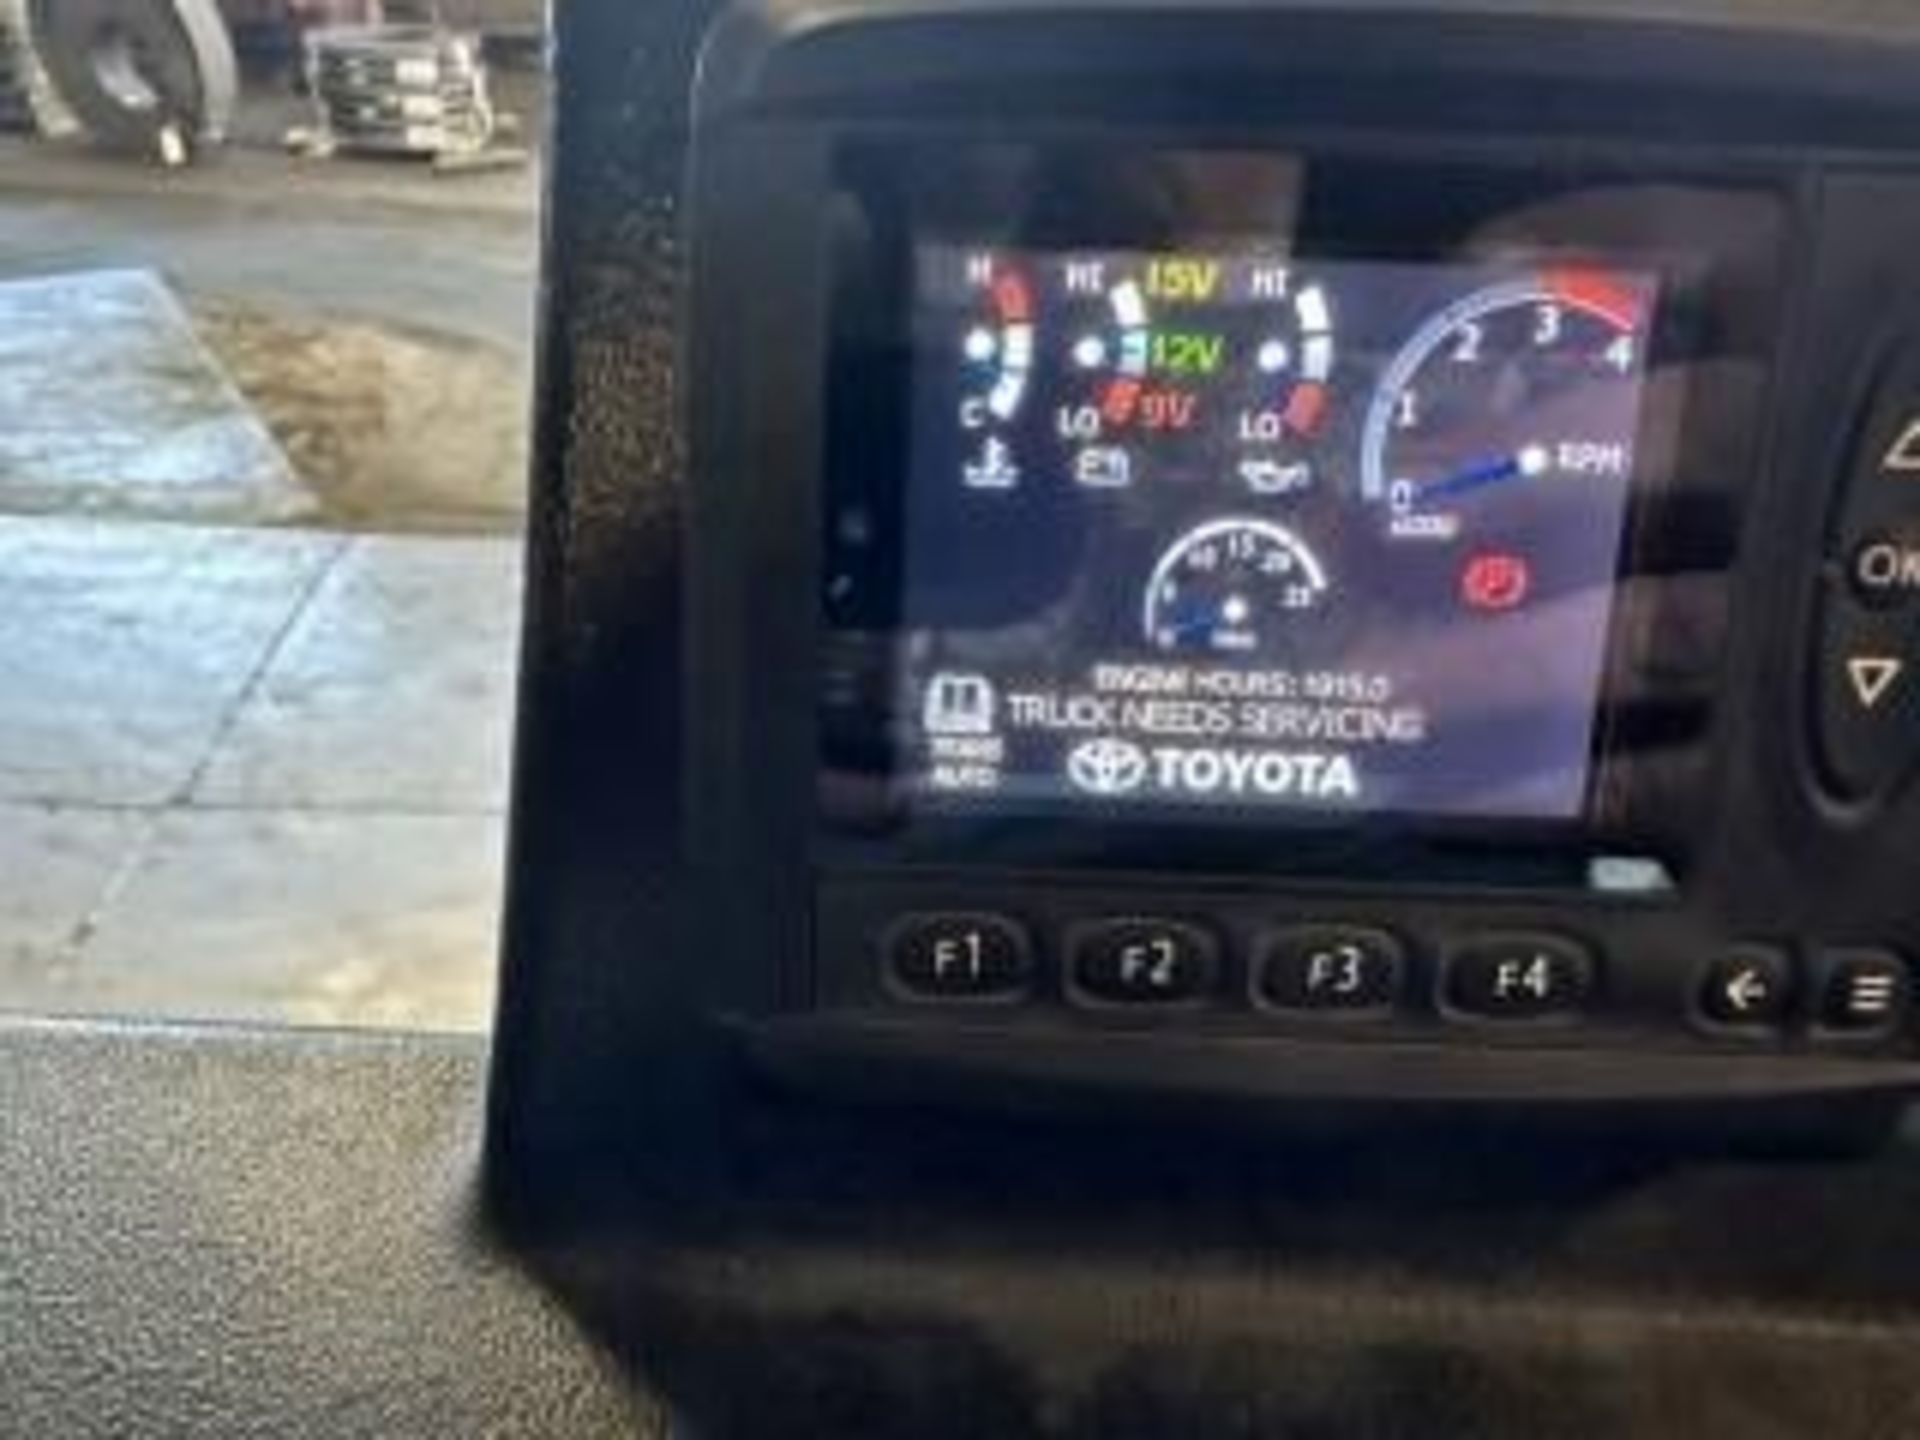 (2018) 55,000 LB. TOYOTA THDC5500-35 PROPANE FORKLIFT. - Image 20 of 20